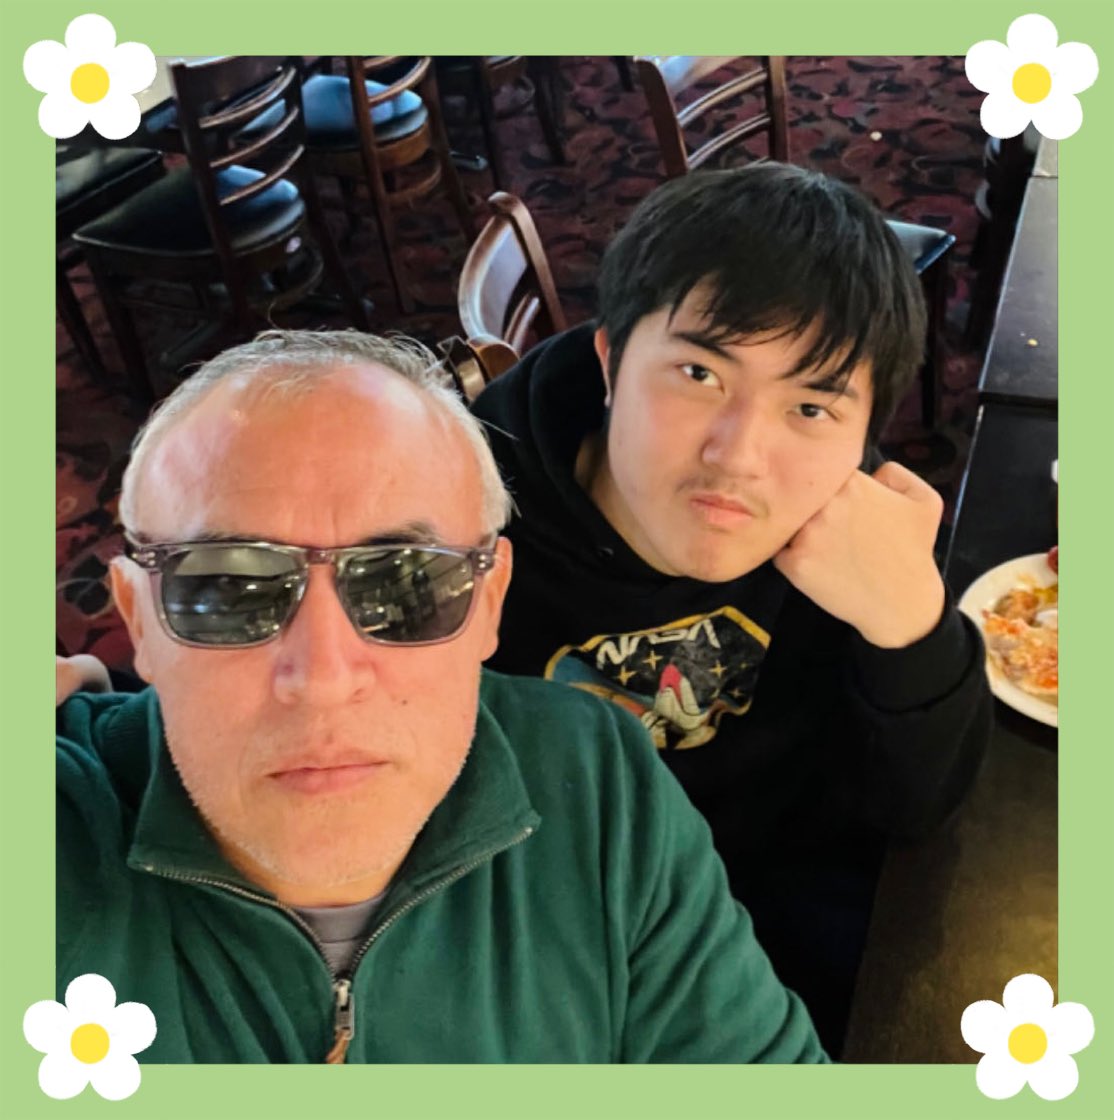 Our Rosemead students went out for a lunch meal for an early St. Patrick’s Day ☘️ celebration!

#StPatricksDay #fieldtrip #studentevents #esl #eslschool